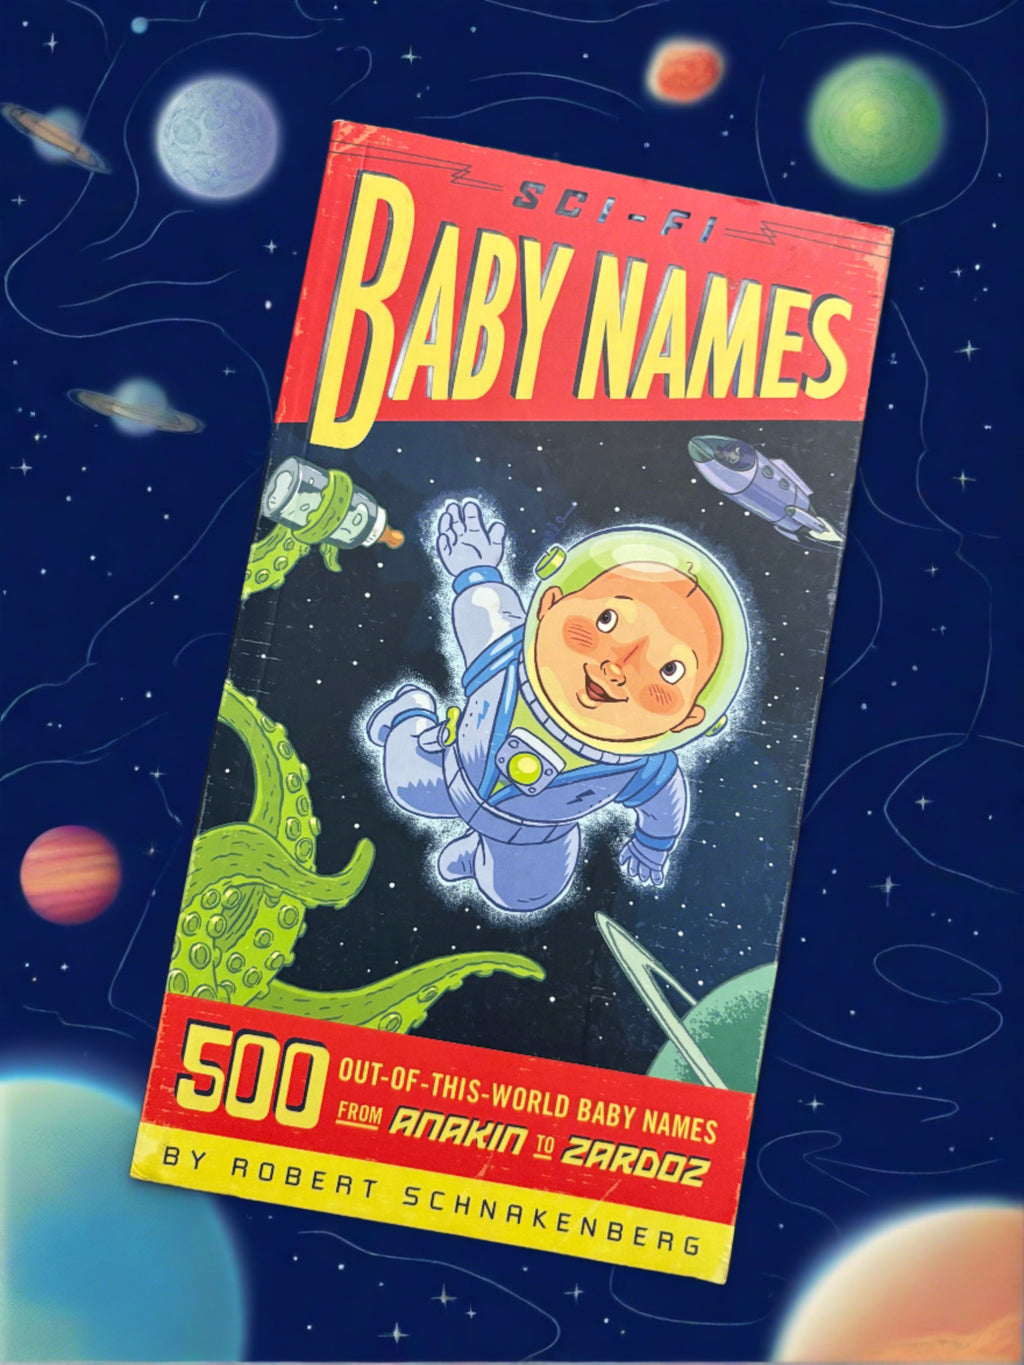 Sci-Fi Baby Names: 500 Out-of-this-World Baby Names from Anakin to Zardoz- By Robert Schnakenberg